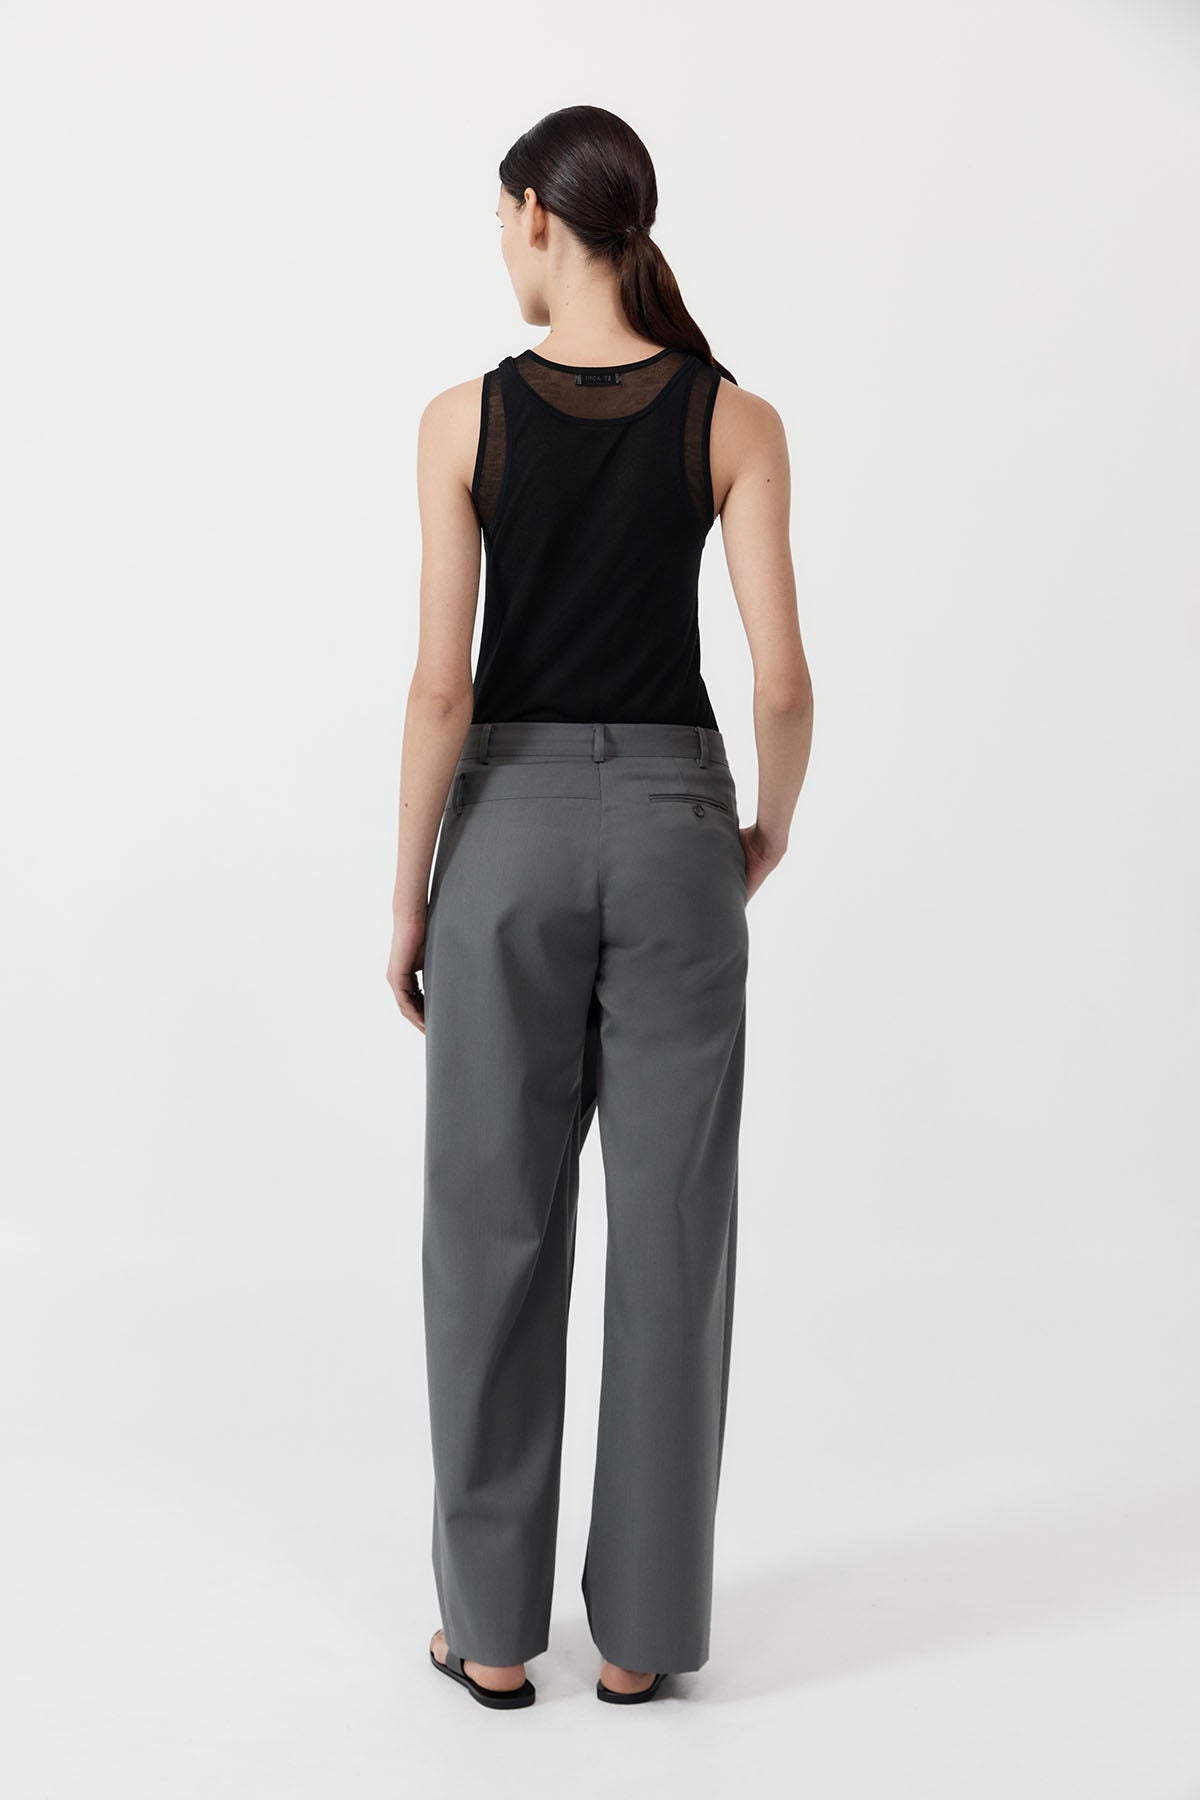 Deconstructed Waist Pants - Pewter Grey